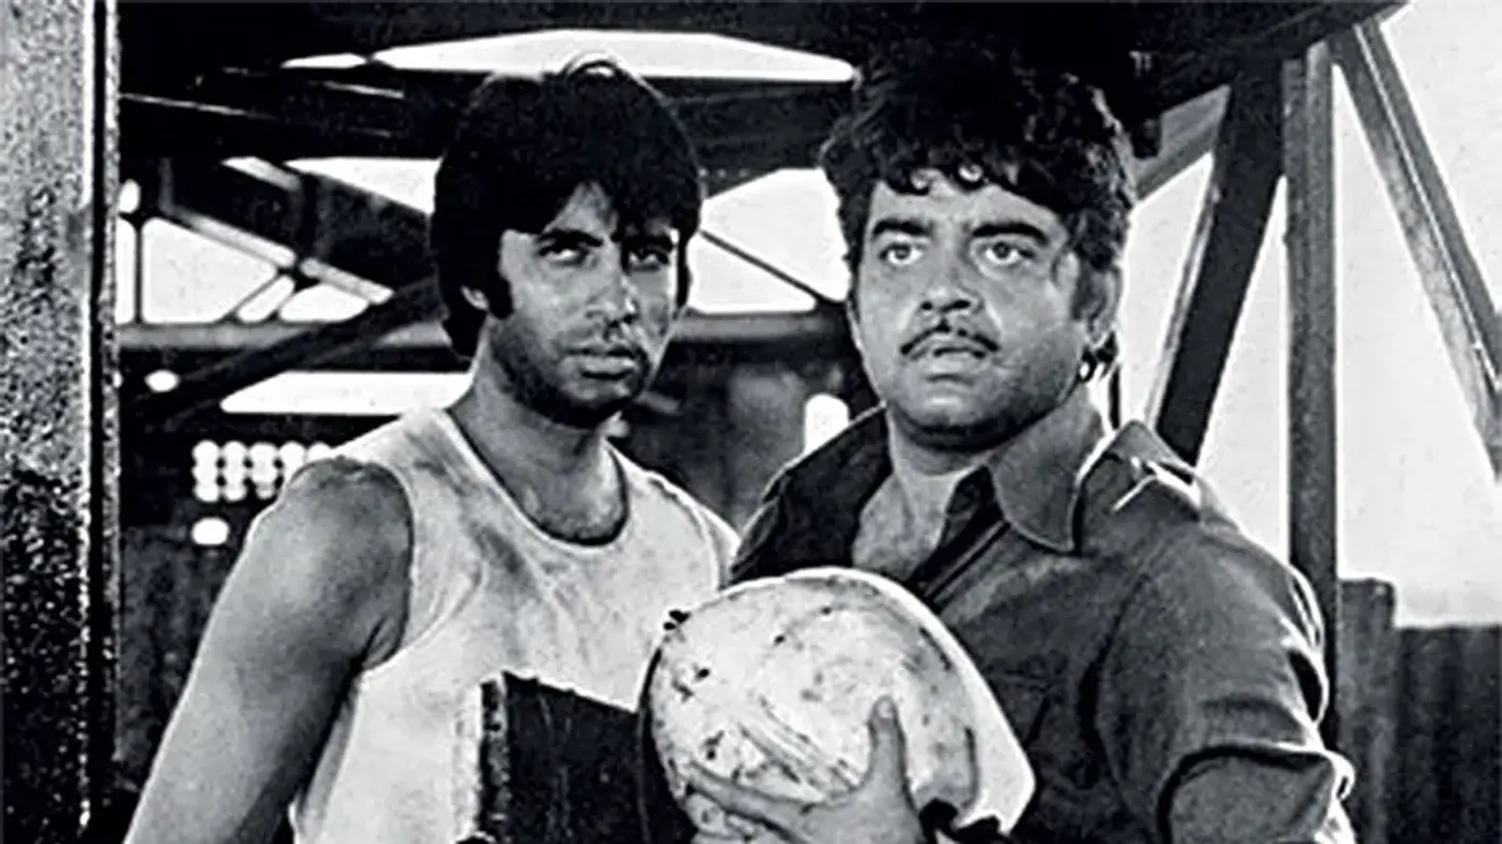 The film Kala Patthar was released in 1979